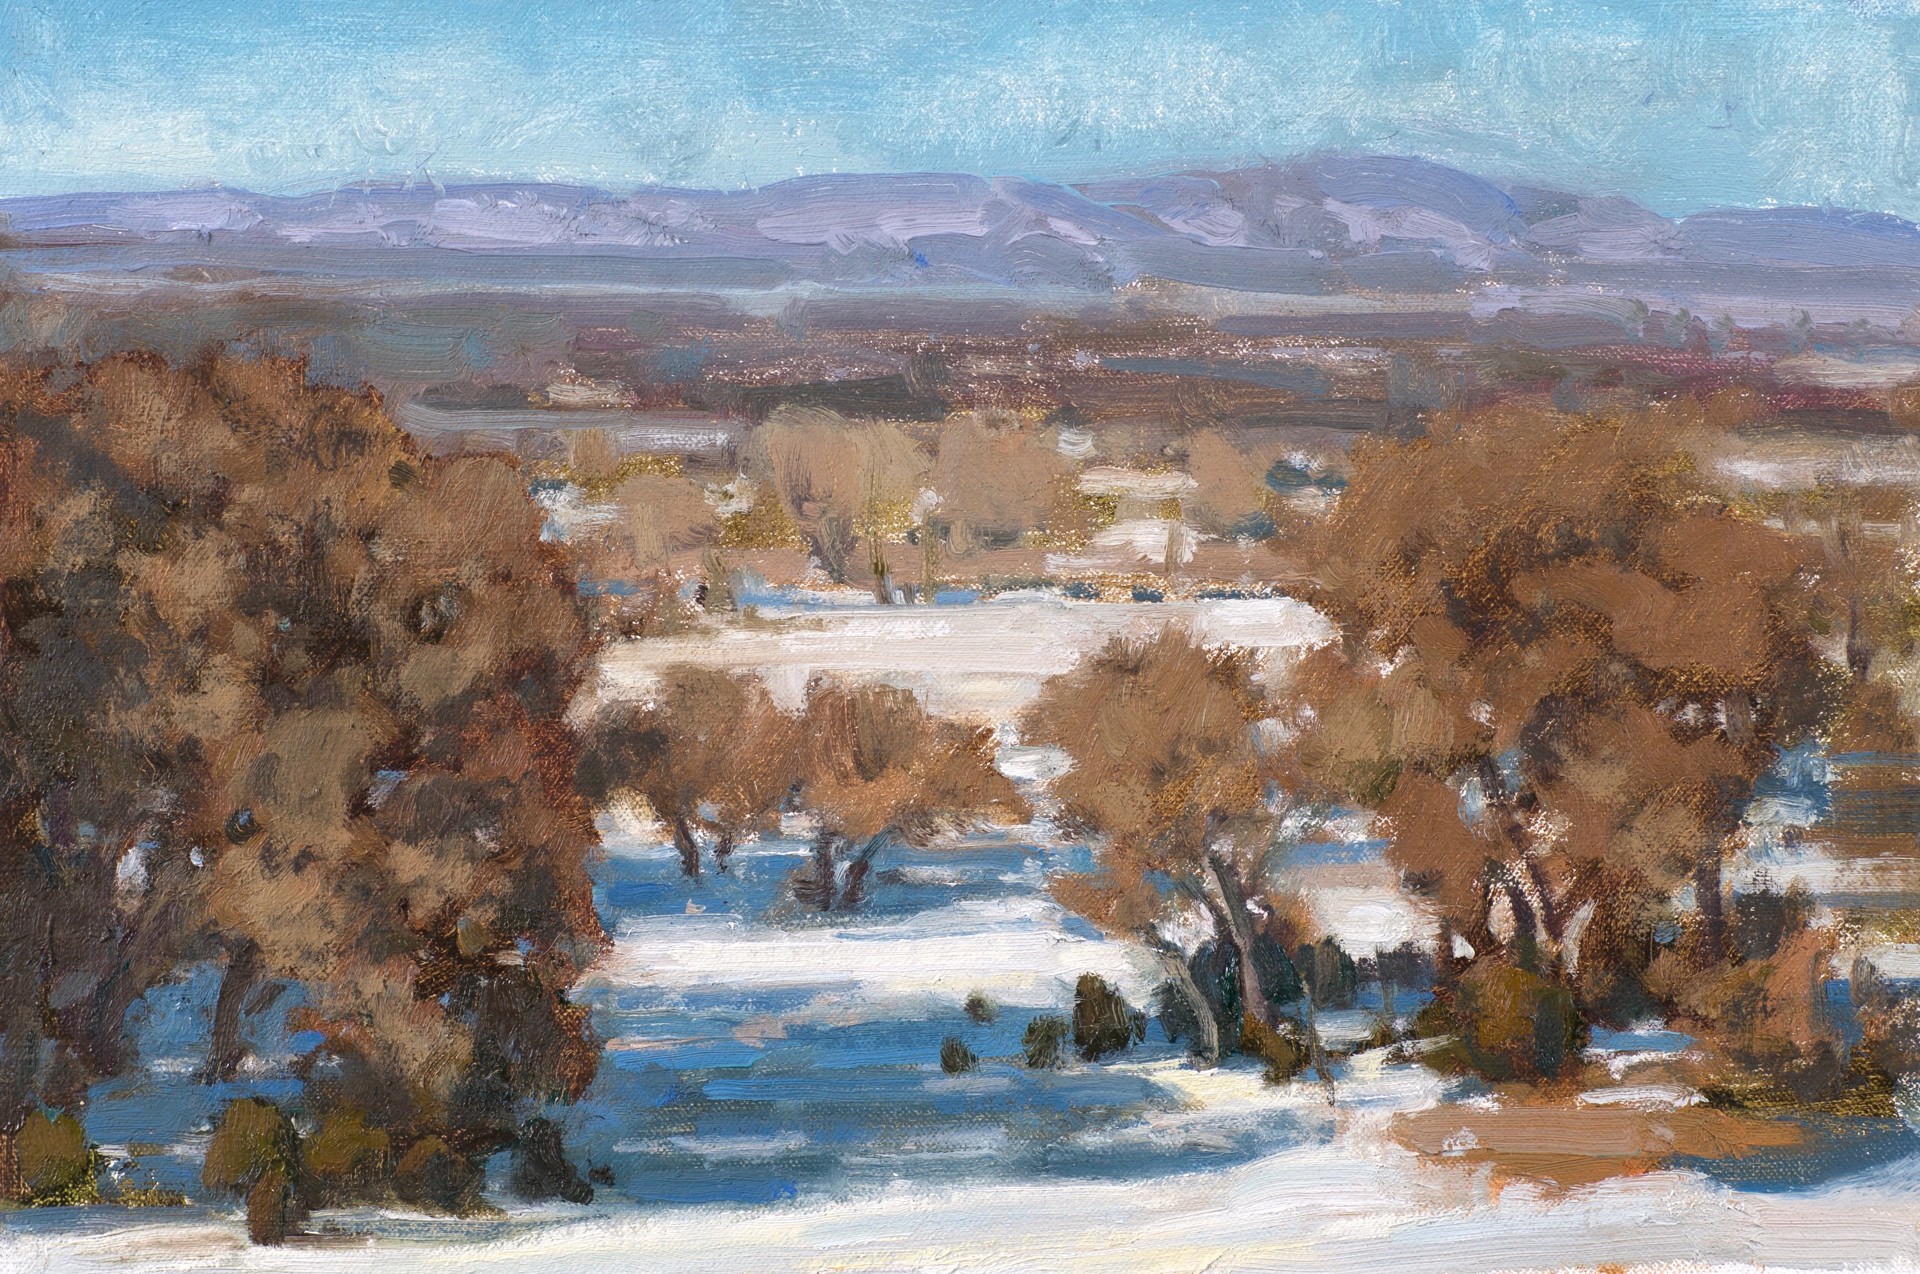 Winter Afternoon Along the Bosque by Bill Gallen